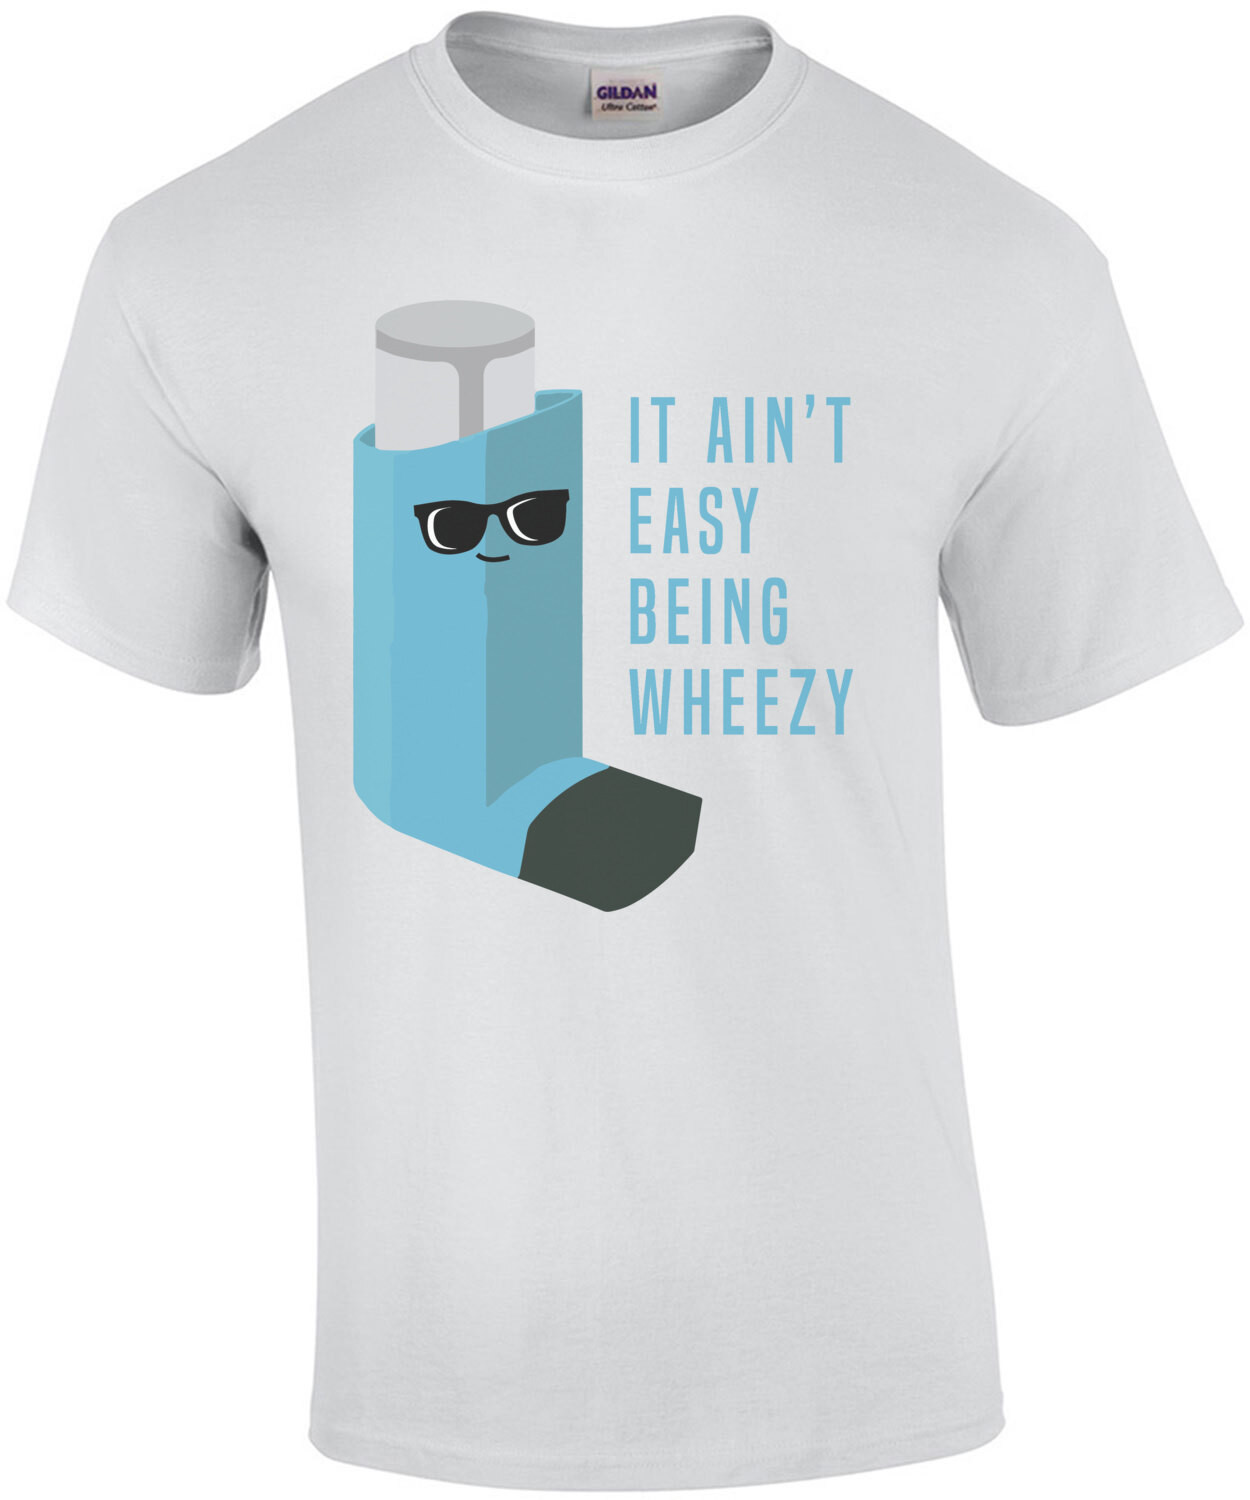 It ain't easy being wheezy - funny asthma t-shirt